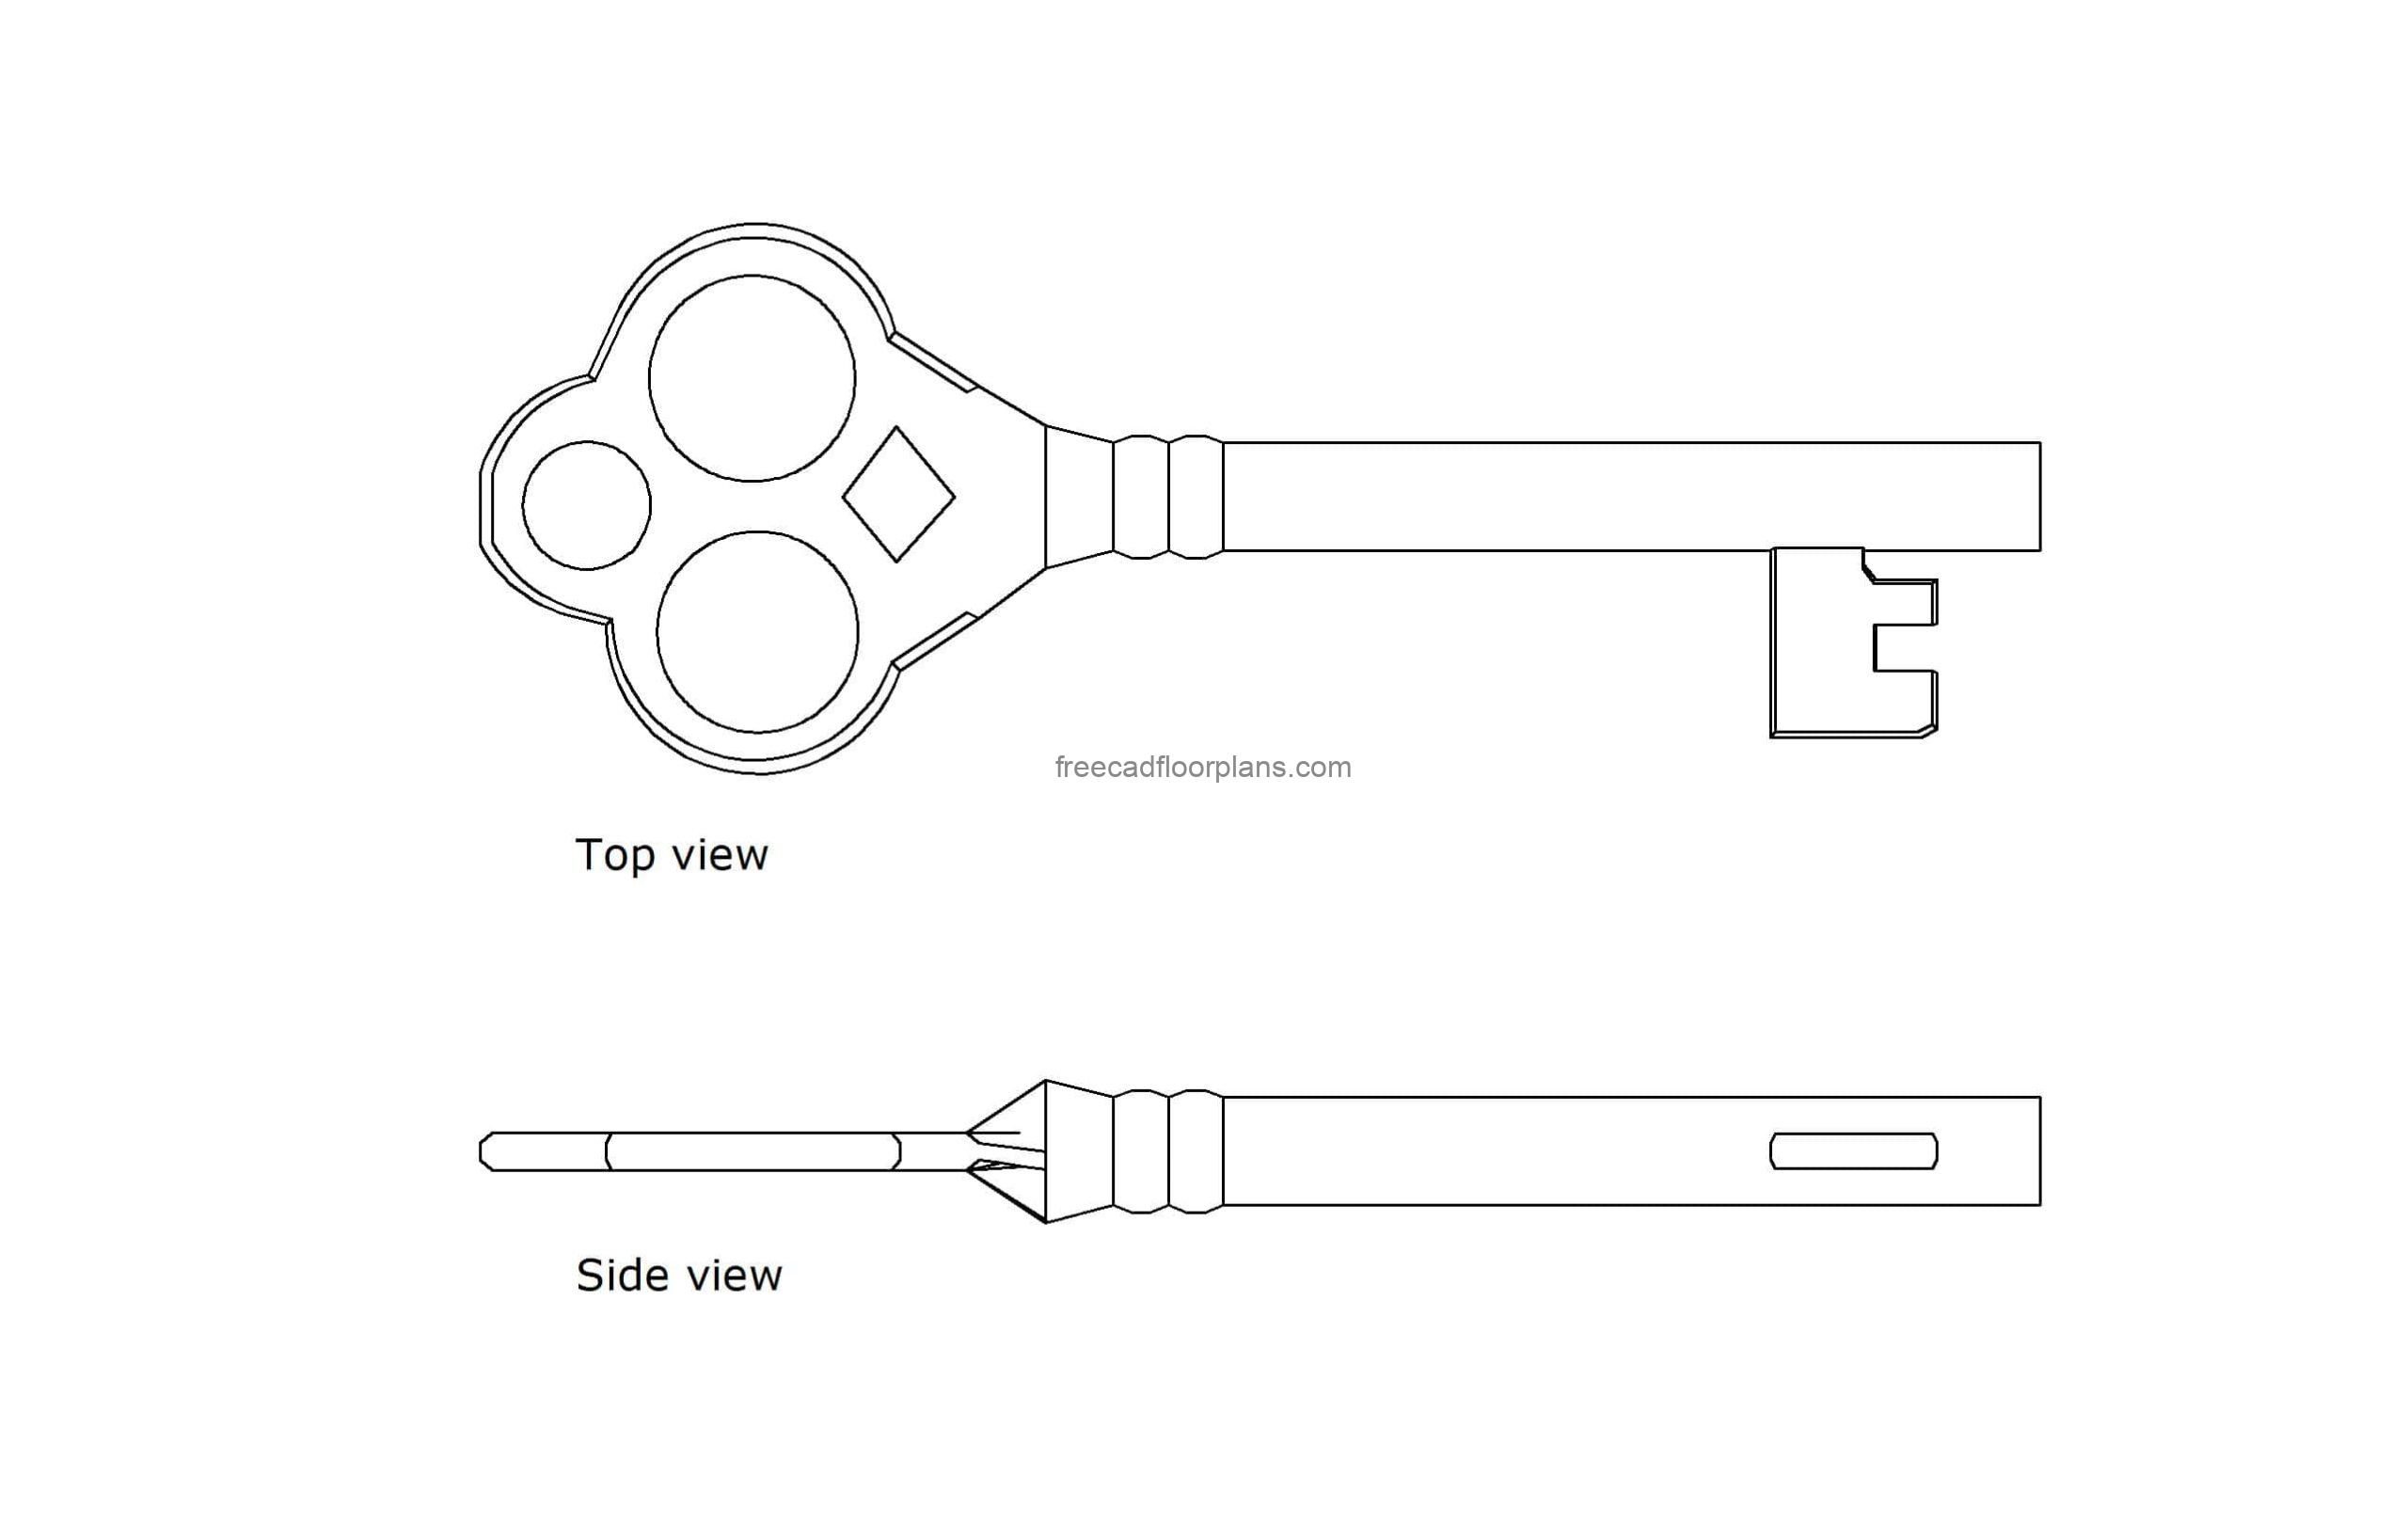 autocad drawing of an old fashioned key, plan and elevation views, dwg file free for download